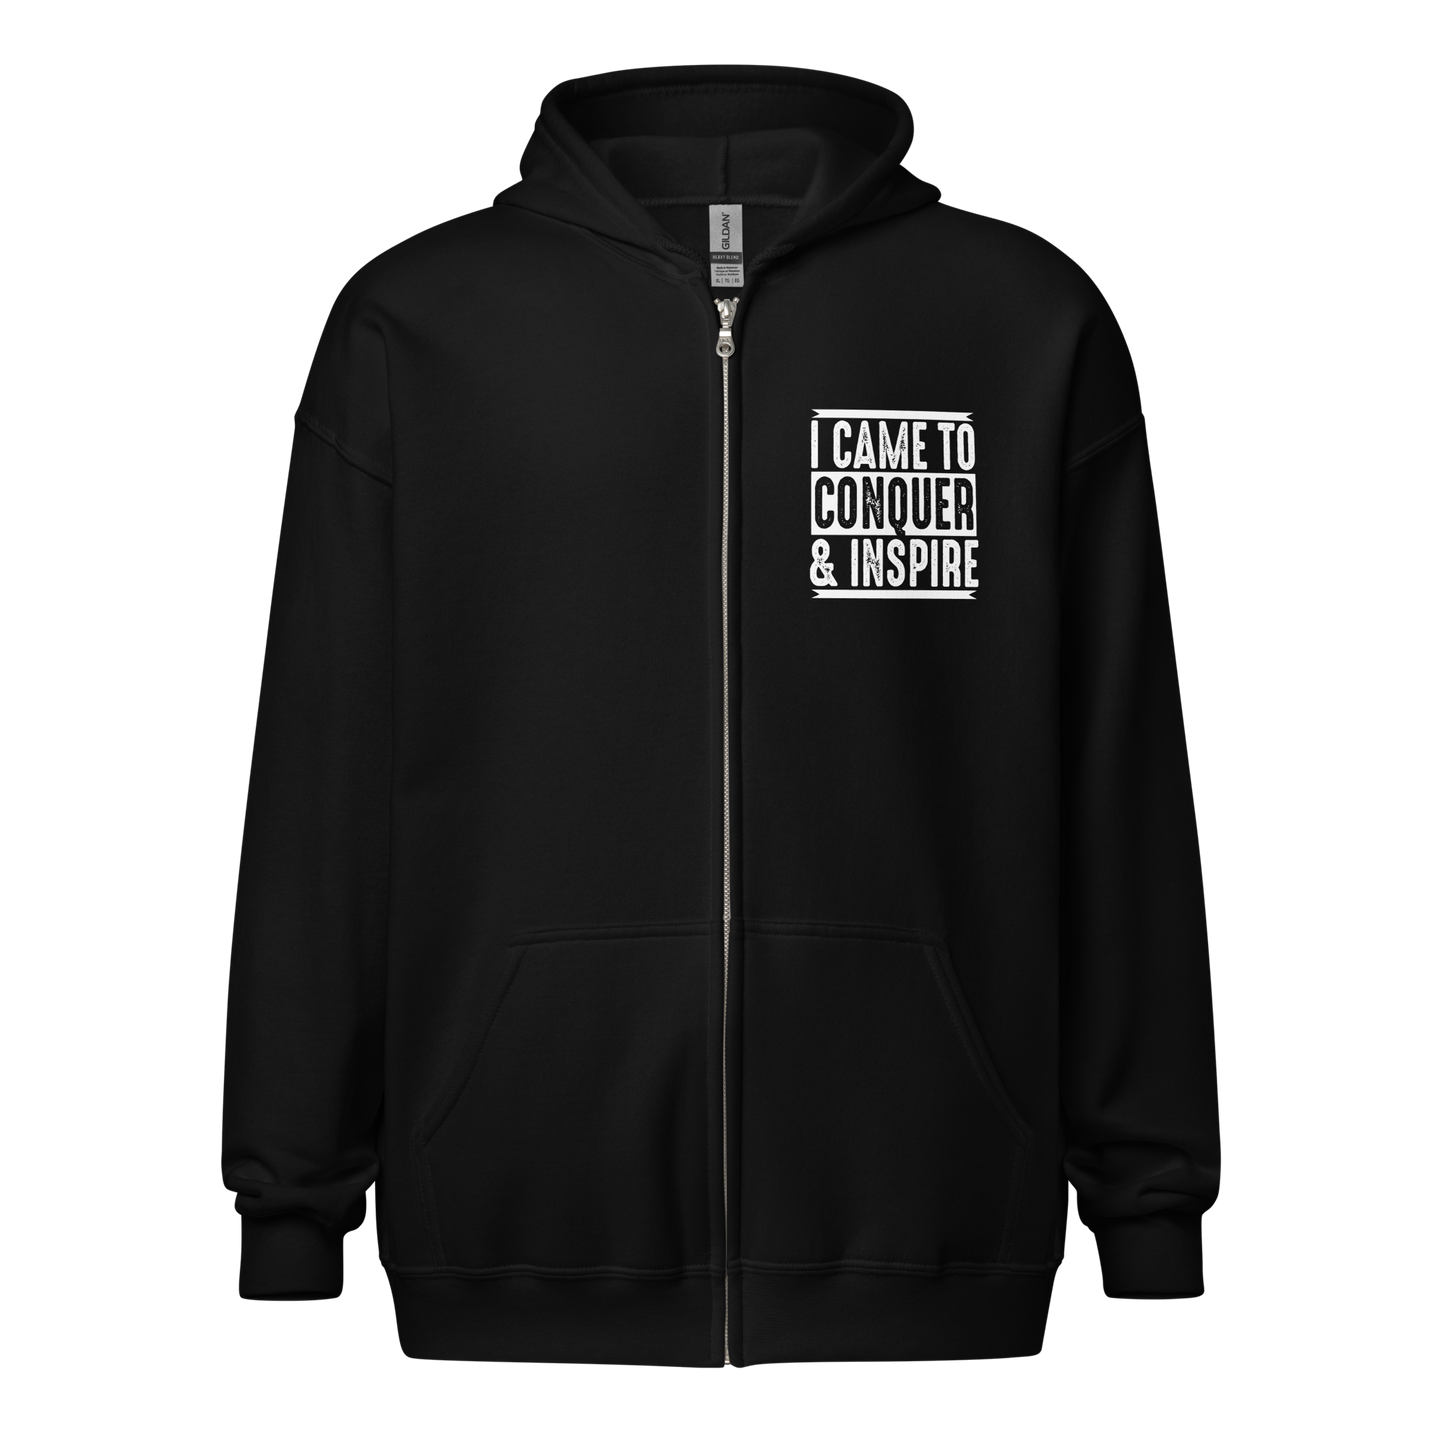 I Came To Conquer & Inspire Zip-up Hoodie